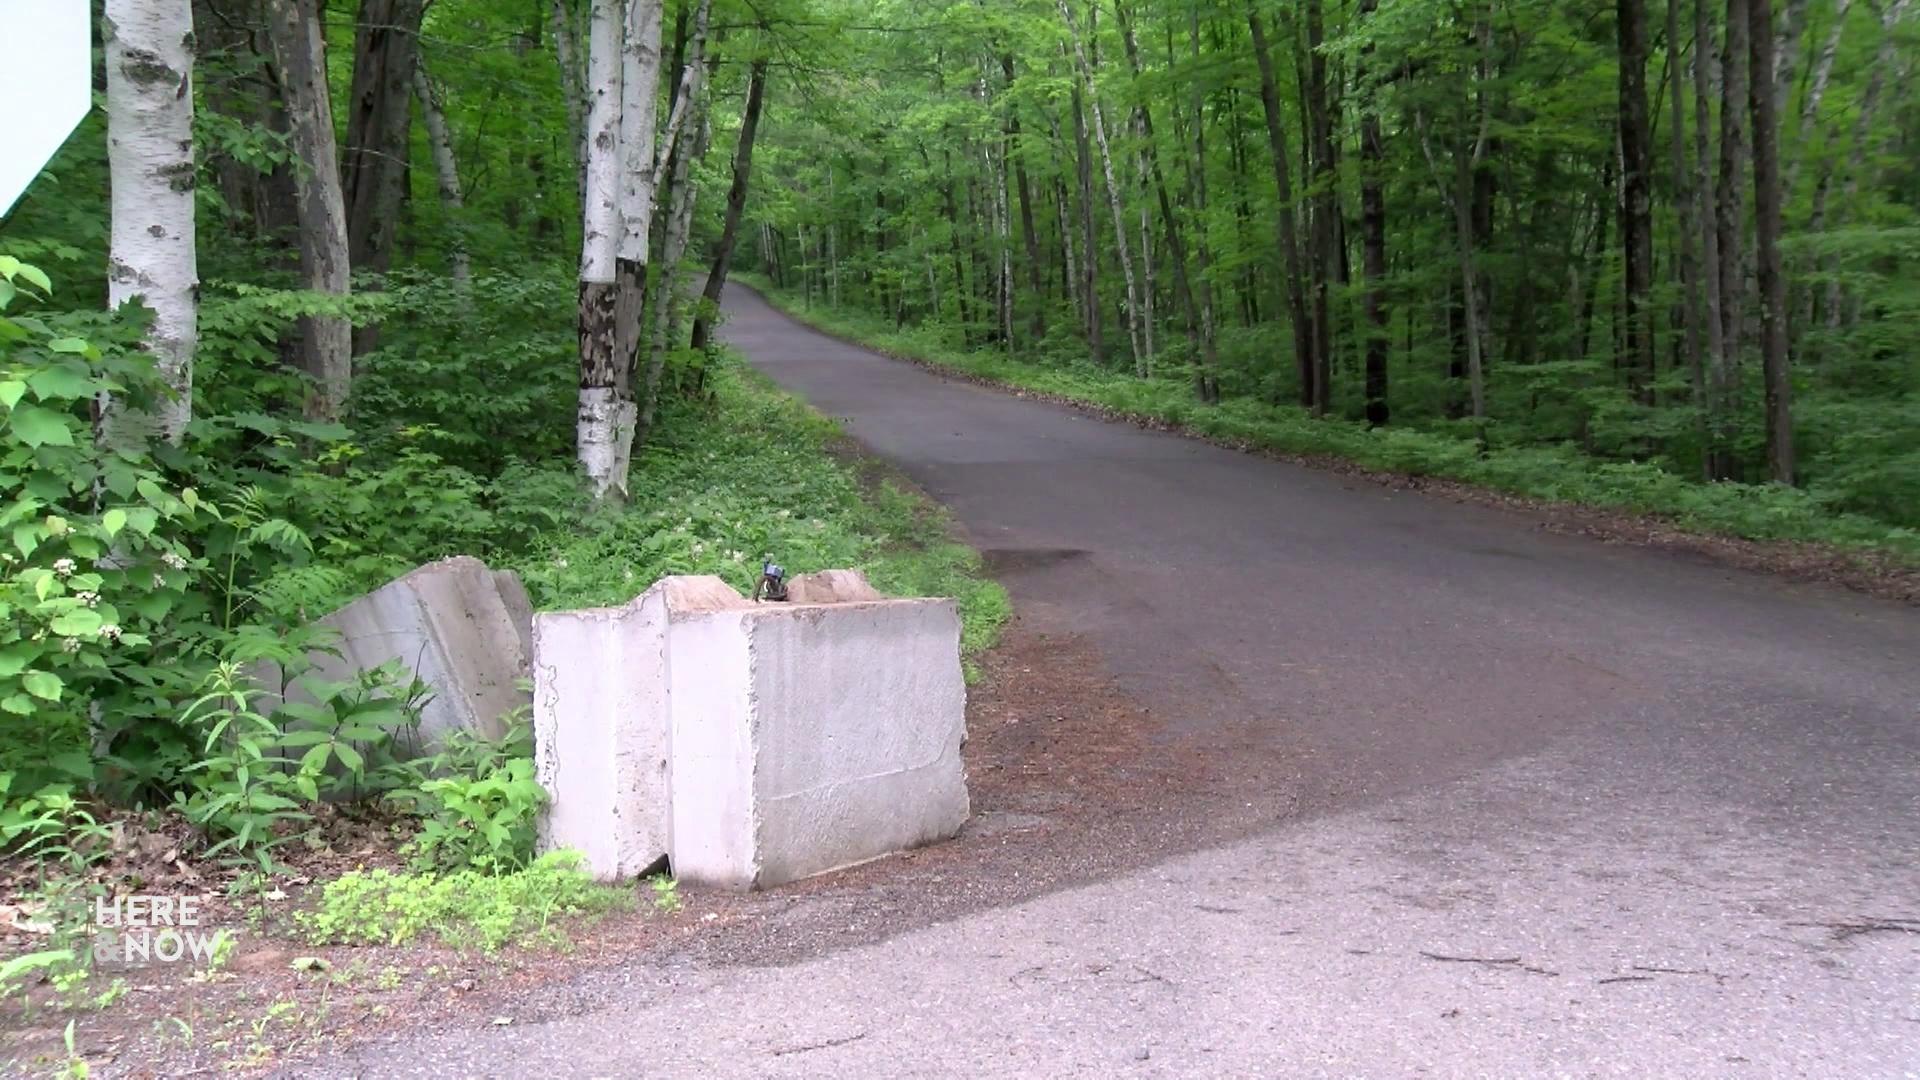 A still image shows concrete blocks on the side of a road running through a wooded area with trees and dense undergrowth.